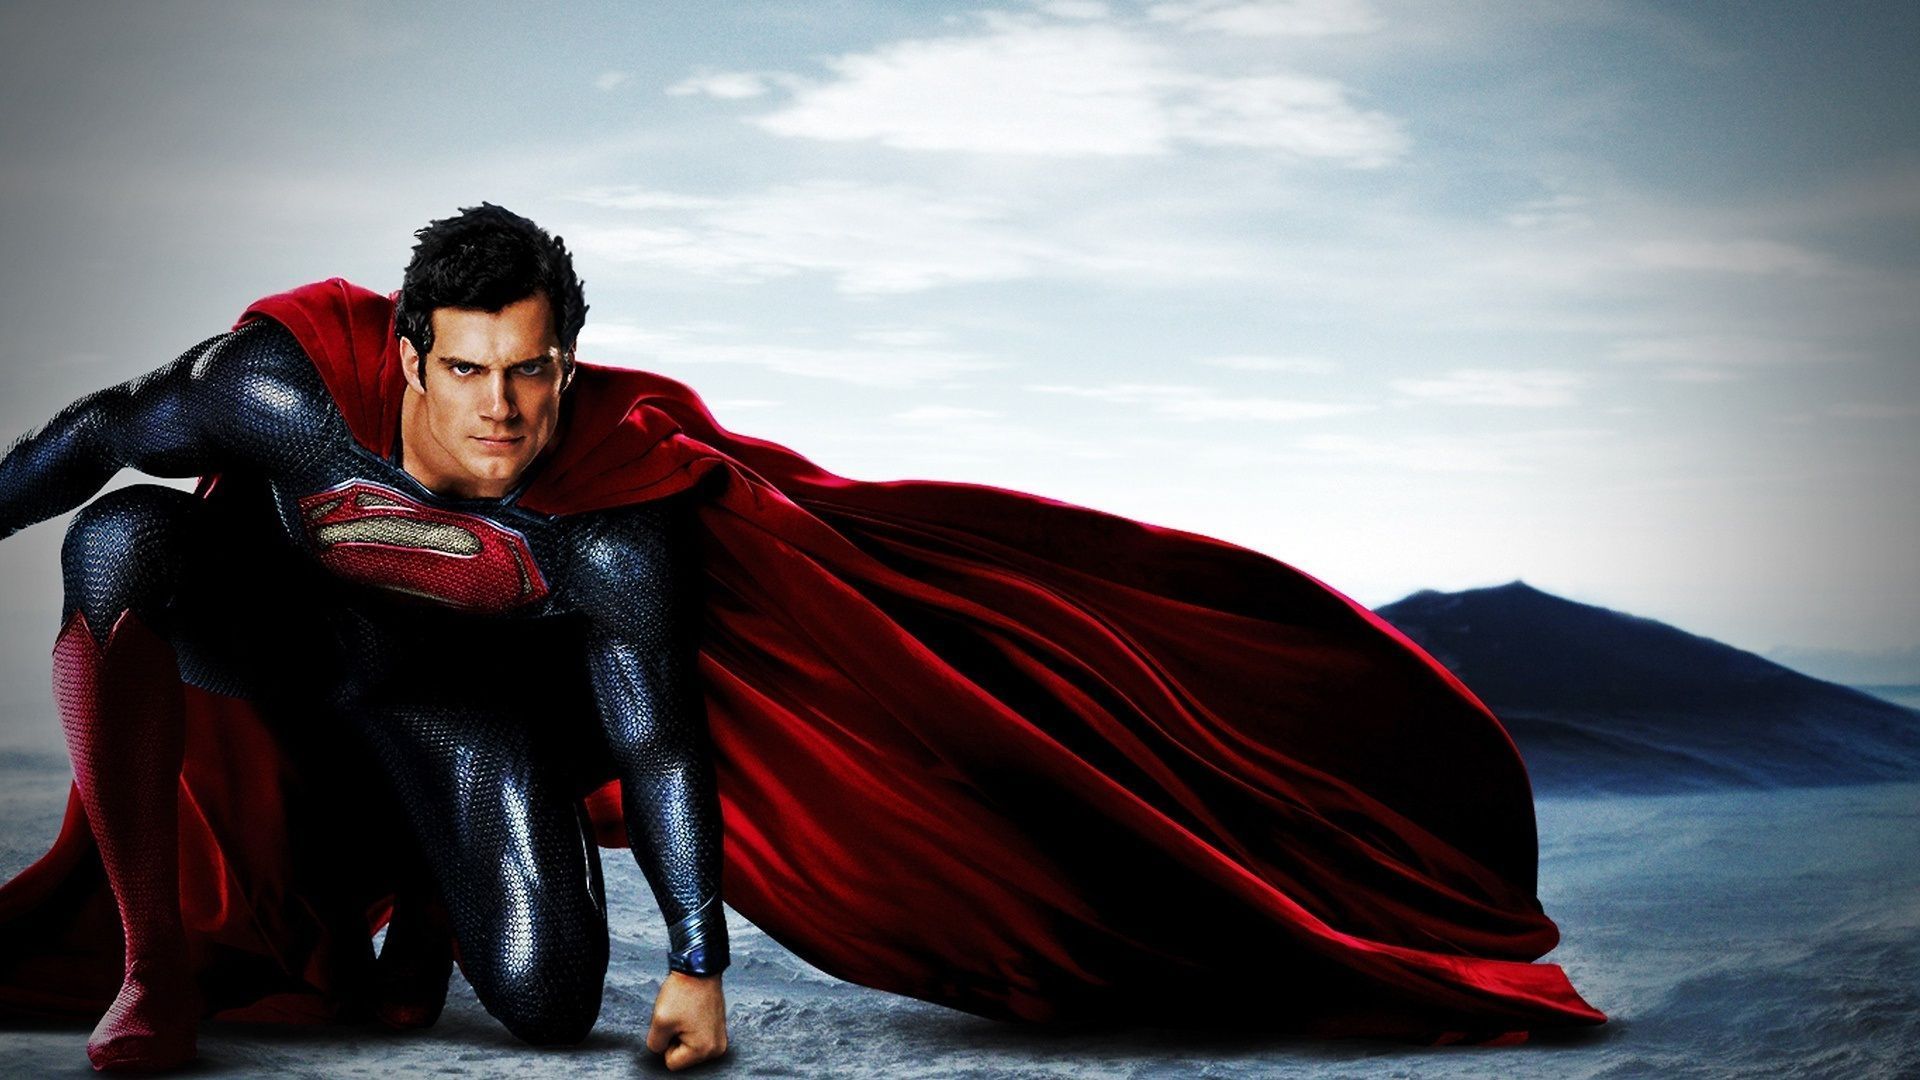 Superman HD Wallpapers Free Download - Tremendous Backgrounds